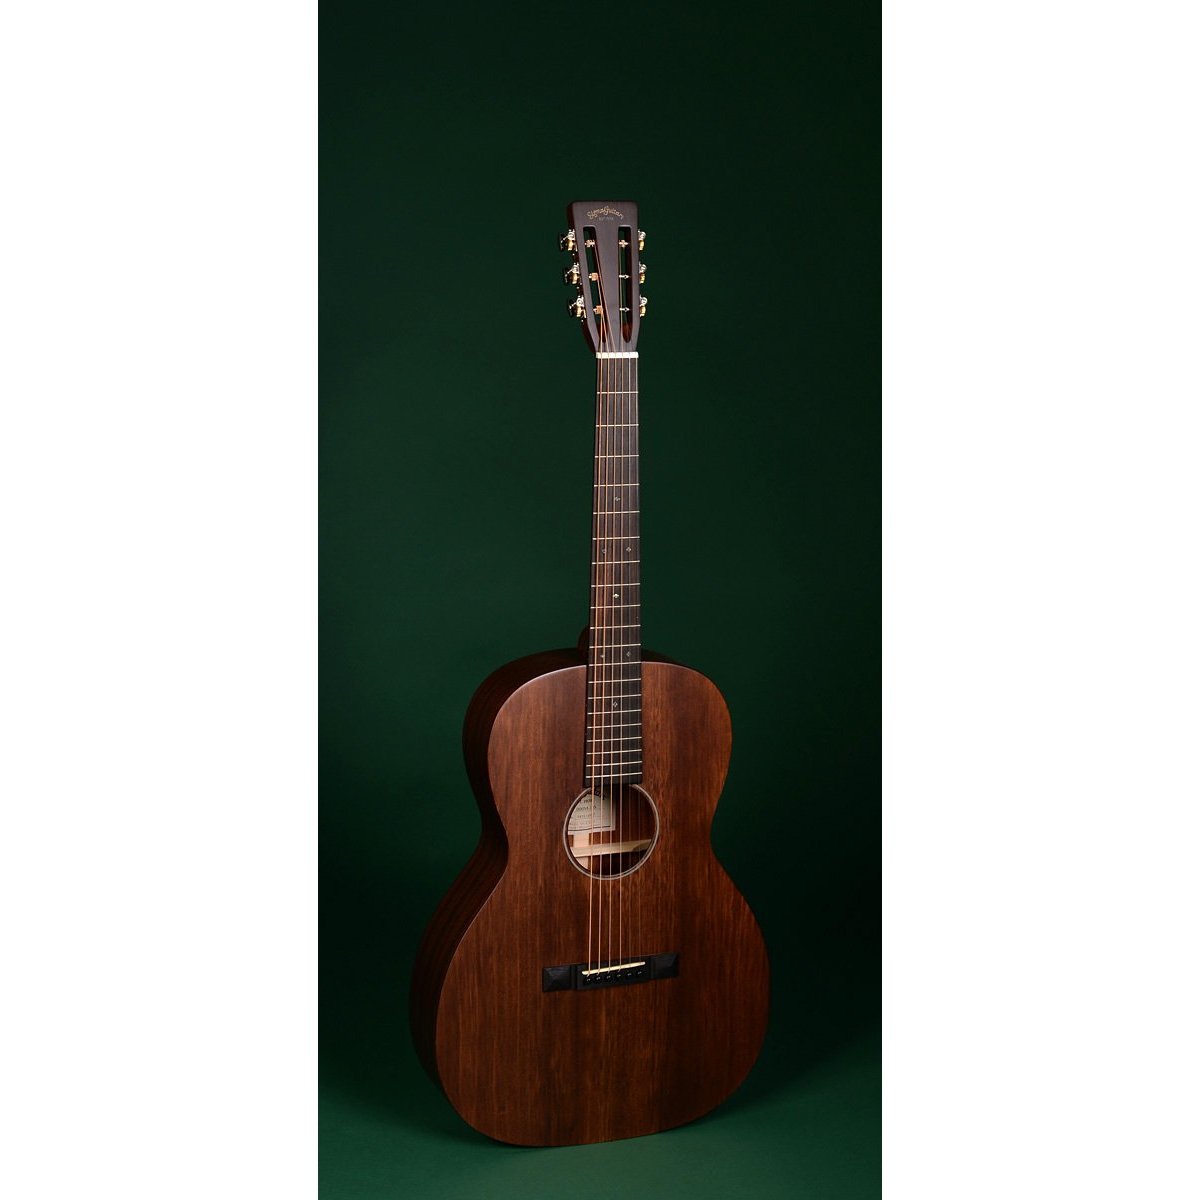 Sigma 000M-15S 15 Series Orchestra 12-Fret Solid Mahogany Acoustic Guitar (Discontinued)-Music World Academy